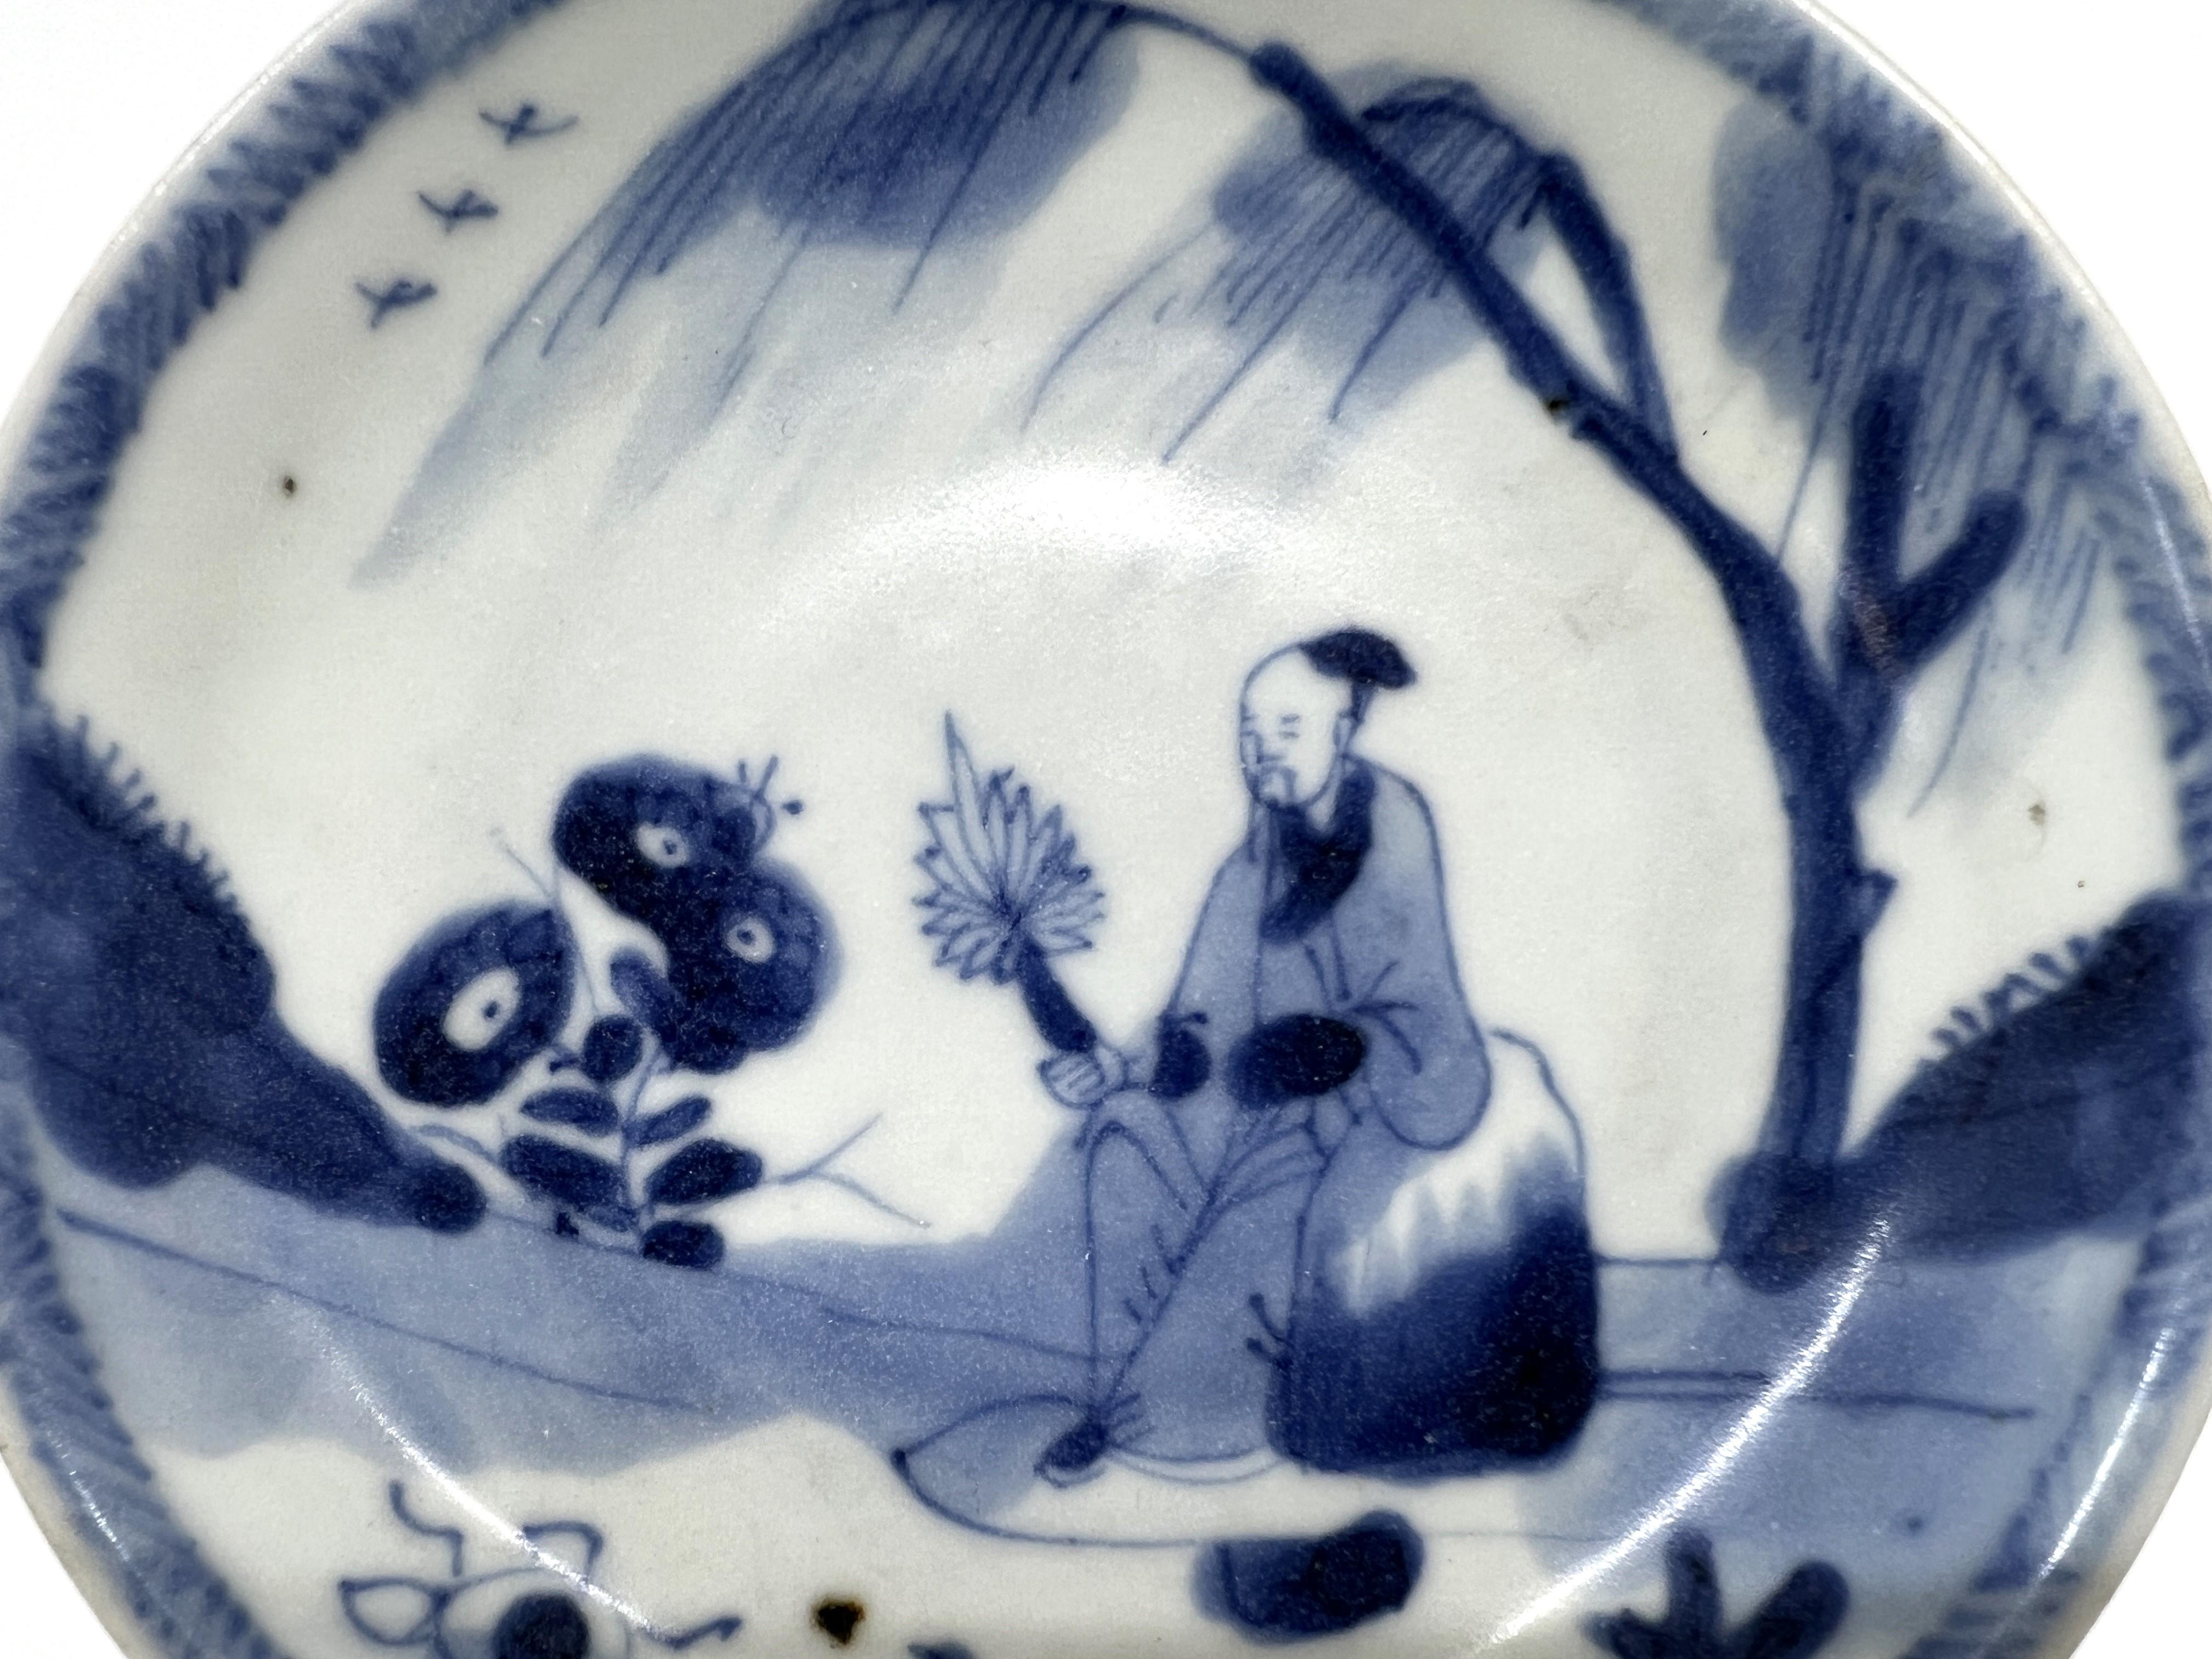 The central motif features a figure, likely a scholar, seated in a tranquil outdoor setting. This person is holding what seems to be a fan, a common accessory for scholars in traditional Chinese depictions, suggesting a moment of leisure or